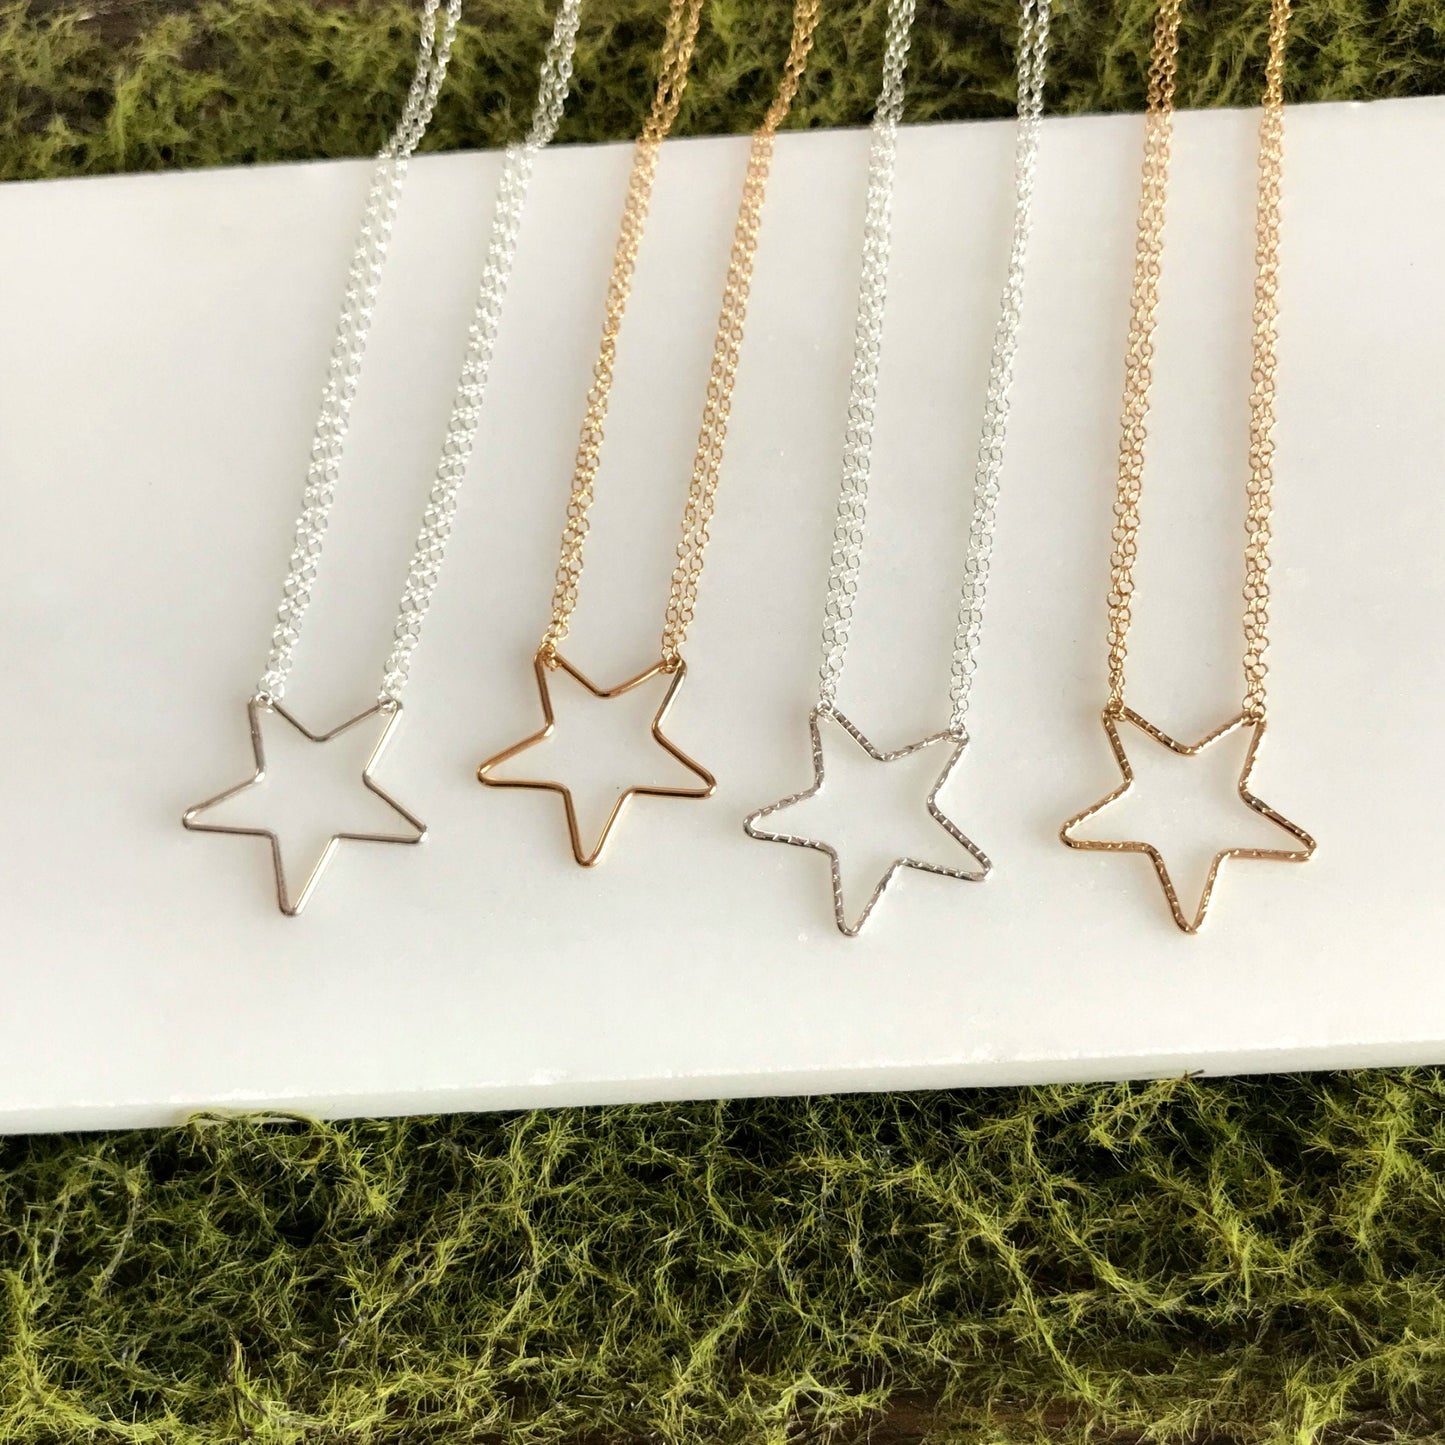 Star Necklace Gold Star Necklace Celestial Jewelry Simple Necklace Delicate necklace Layering Necklace Silver Star Minimalist Necklace